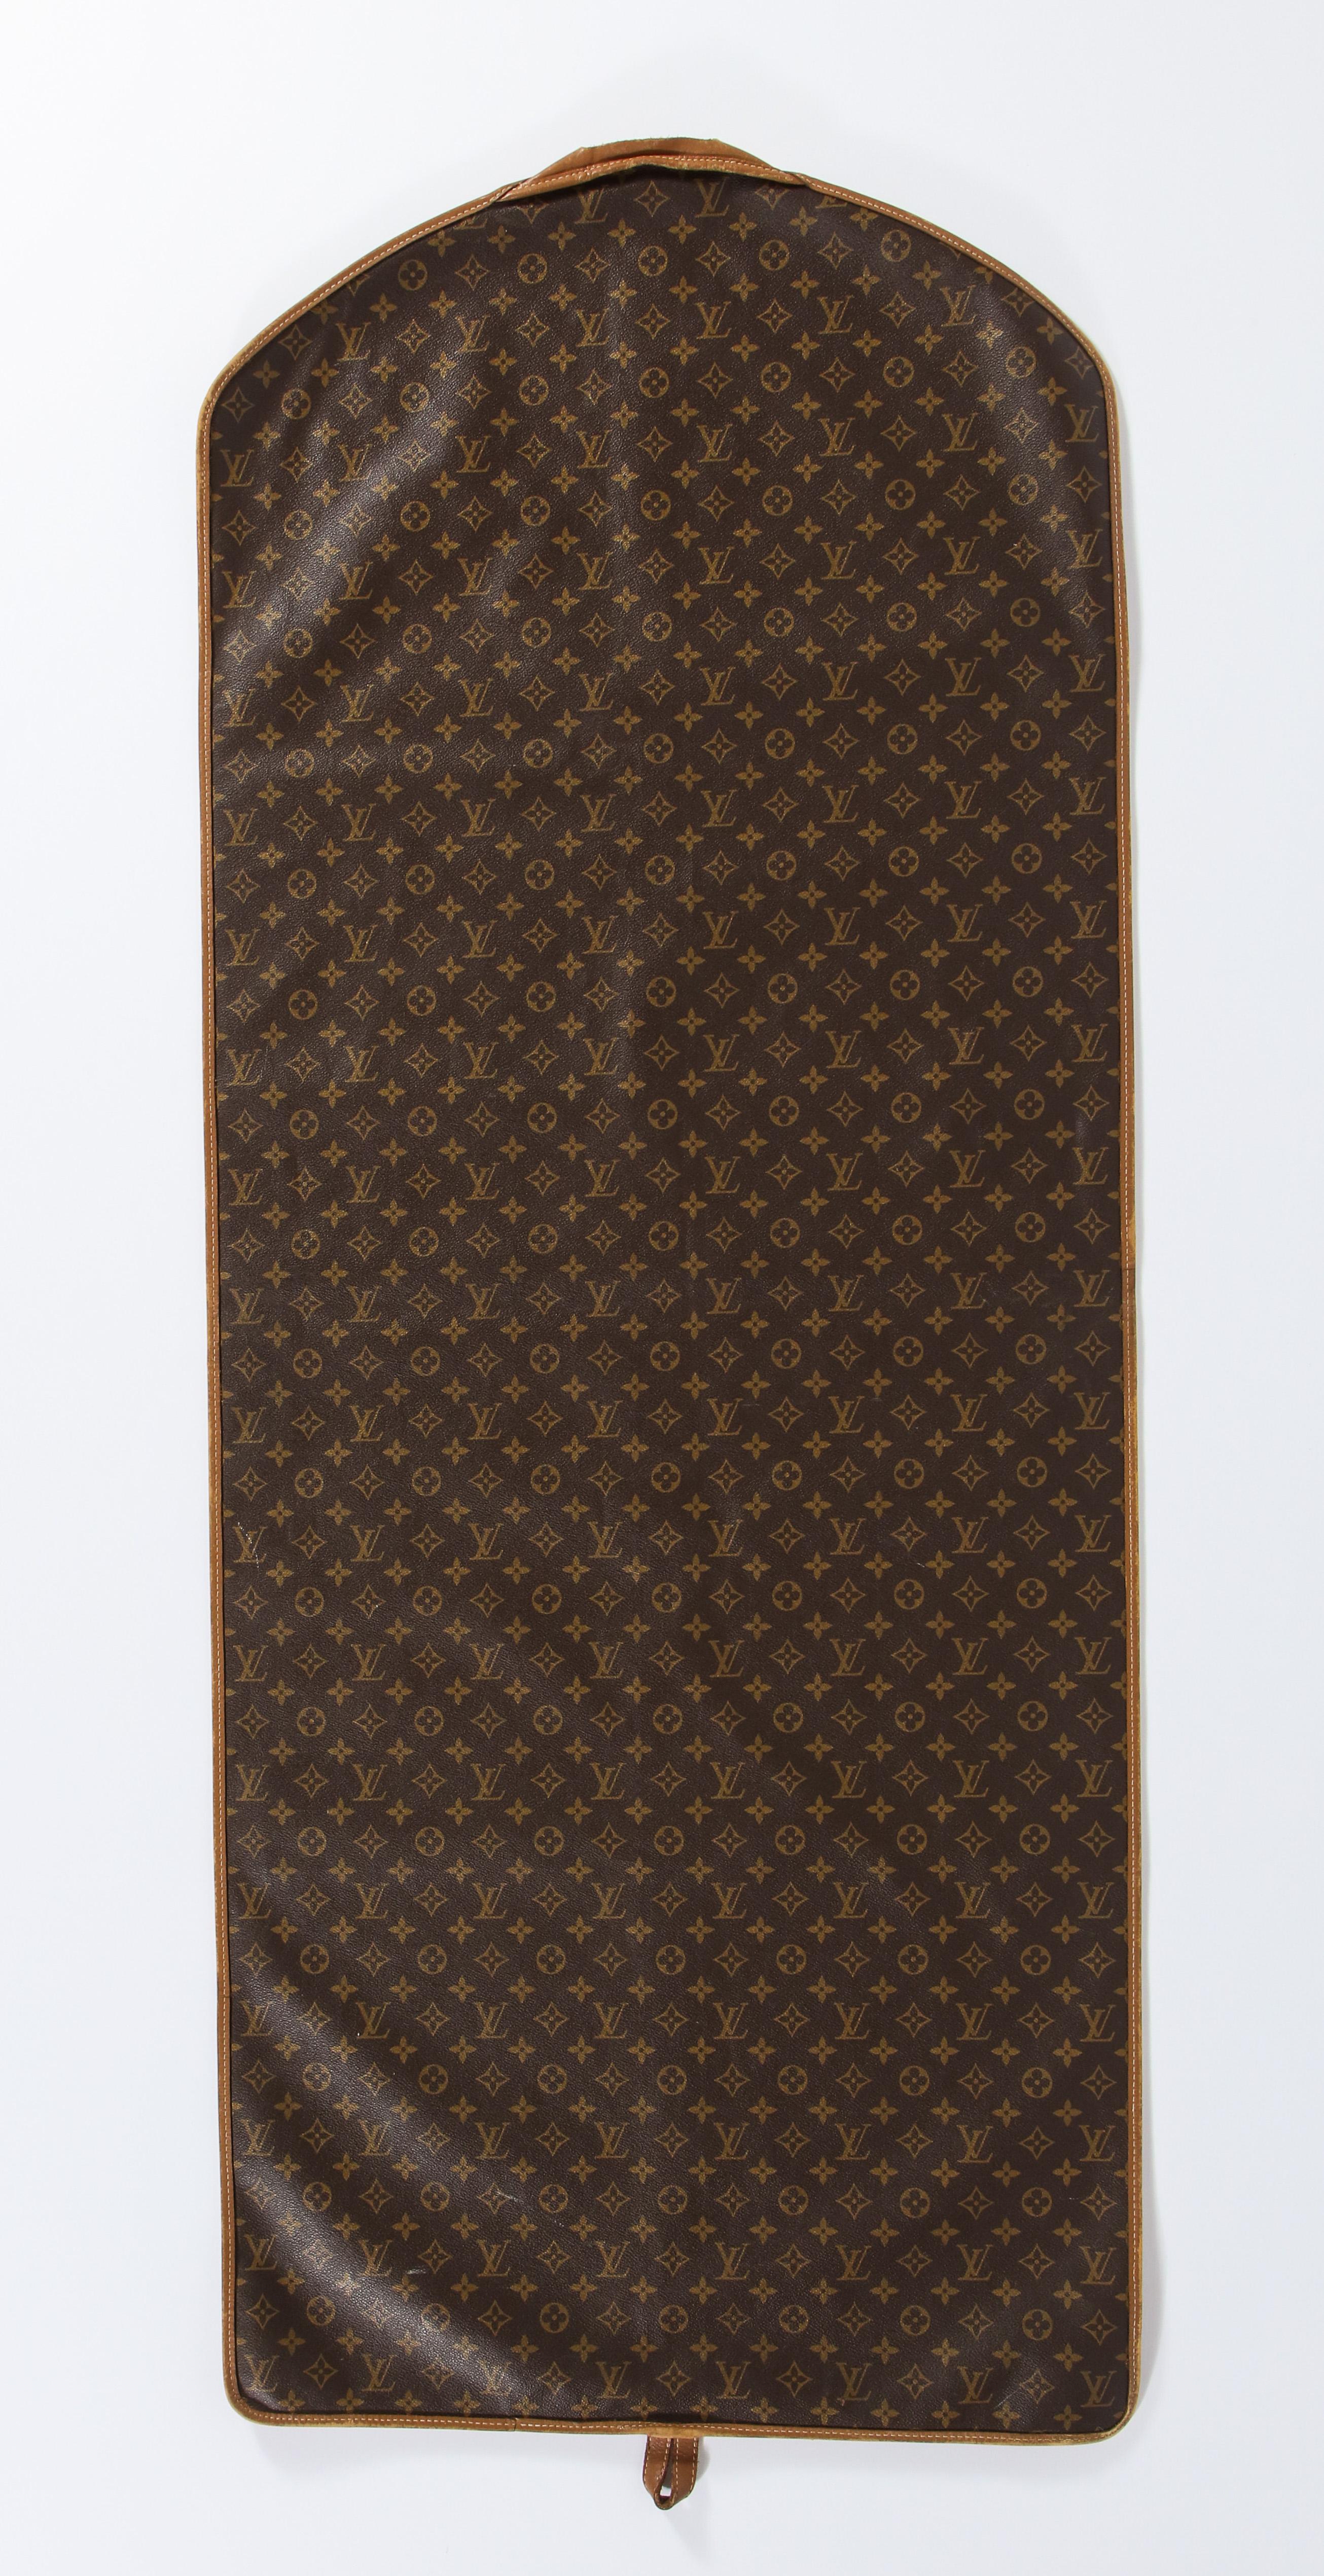 Slim Louis Vuitton monogram garment cover in brown coated canvas with leather trim. Made by The French Company in the 1970s. Open hanger slit at the top with a leather loop at the bottom; some rubbing wear around the trim particularly at the top.